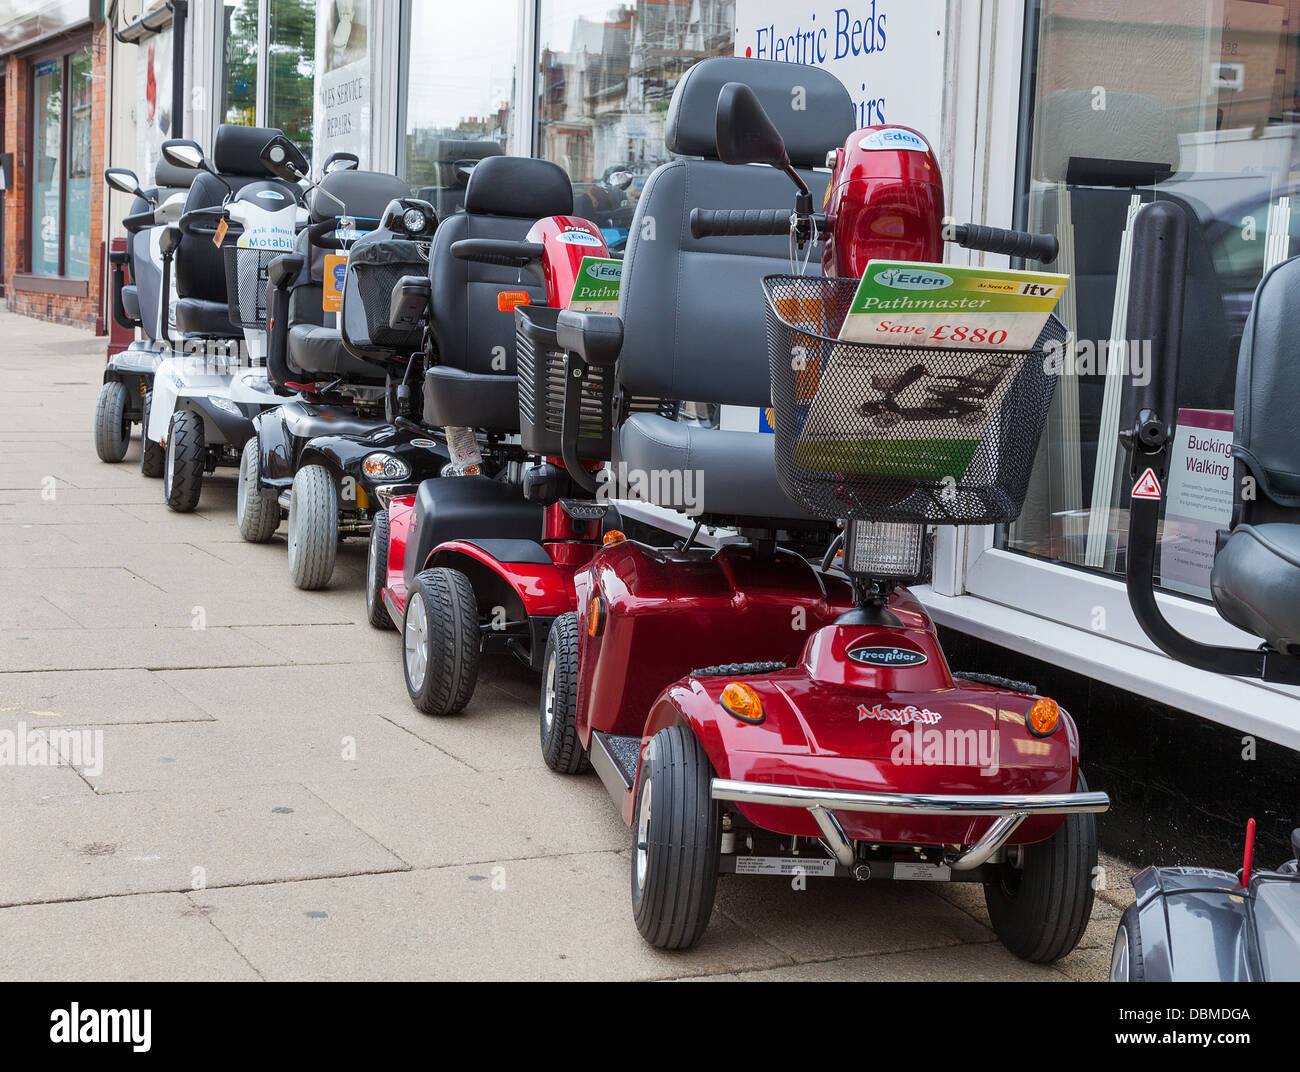 Row of mobility scooters ready for sale Stock Photo